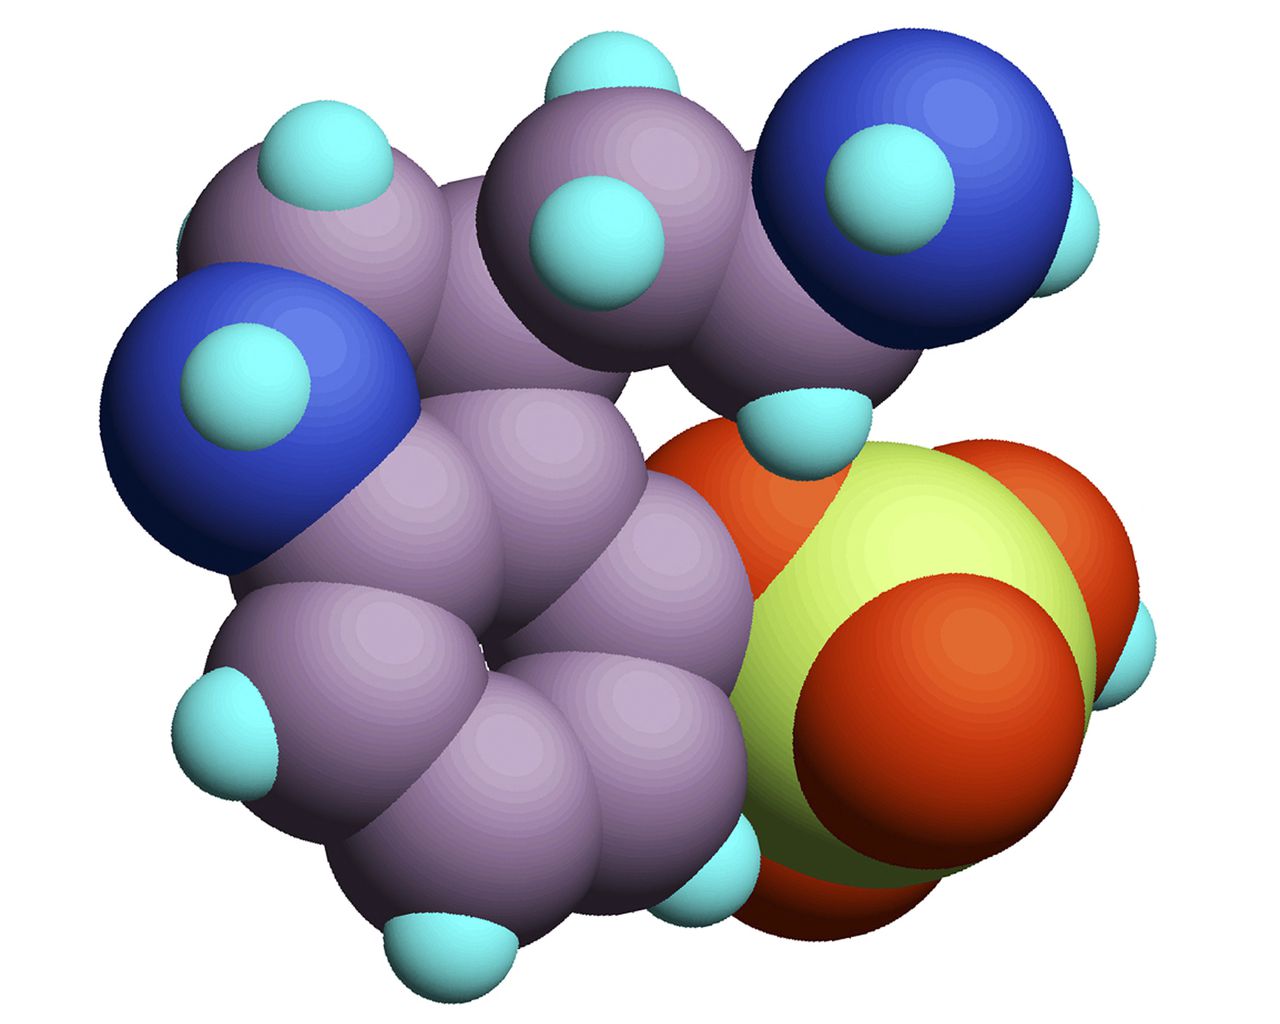 Molecular model of psilocybin. C12H22N2O4P. Carbon: purple, Phosphorus: yellow, Oxygen: orange, Nitrogen: blue, Hydrogen: aqua. Psilocybin (4-phosphoryloxy-N, N-dimethyltryptamine) is a psychedelic alkaloid of the tryptamine family found in some fungi, e.g. genus Psilocybe (more in the caps than in the stems). Hallucinogenic susbstance in the fruiting bodies of Mexican fungus Psilocybe mexicana. Psilocybin-containing mushrooms are called magic mushrooms or shrooms. Most psilocybin mushrooms bruise blue when handled. Psilocybin effects are comparable to LSD. Psilocybin is rapidly dephosphorylated in the body to psilocin which then acts as an agonist at the 5-HT2A serotonin receptor in the brain where it mimics the effects of serotonin (5-HT). --- Image by © Mediscan/Corbis